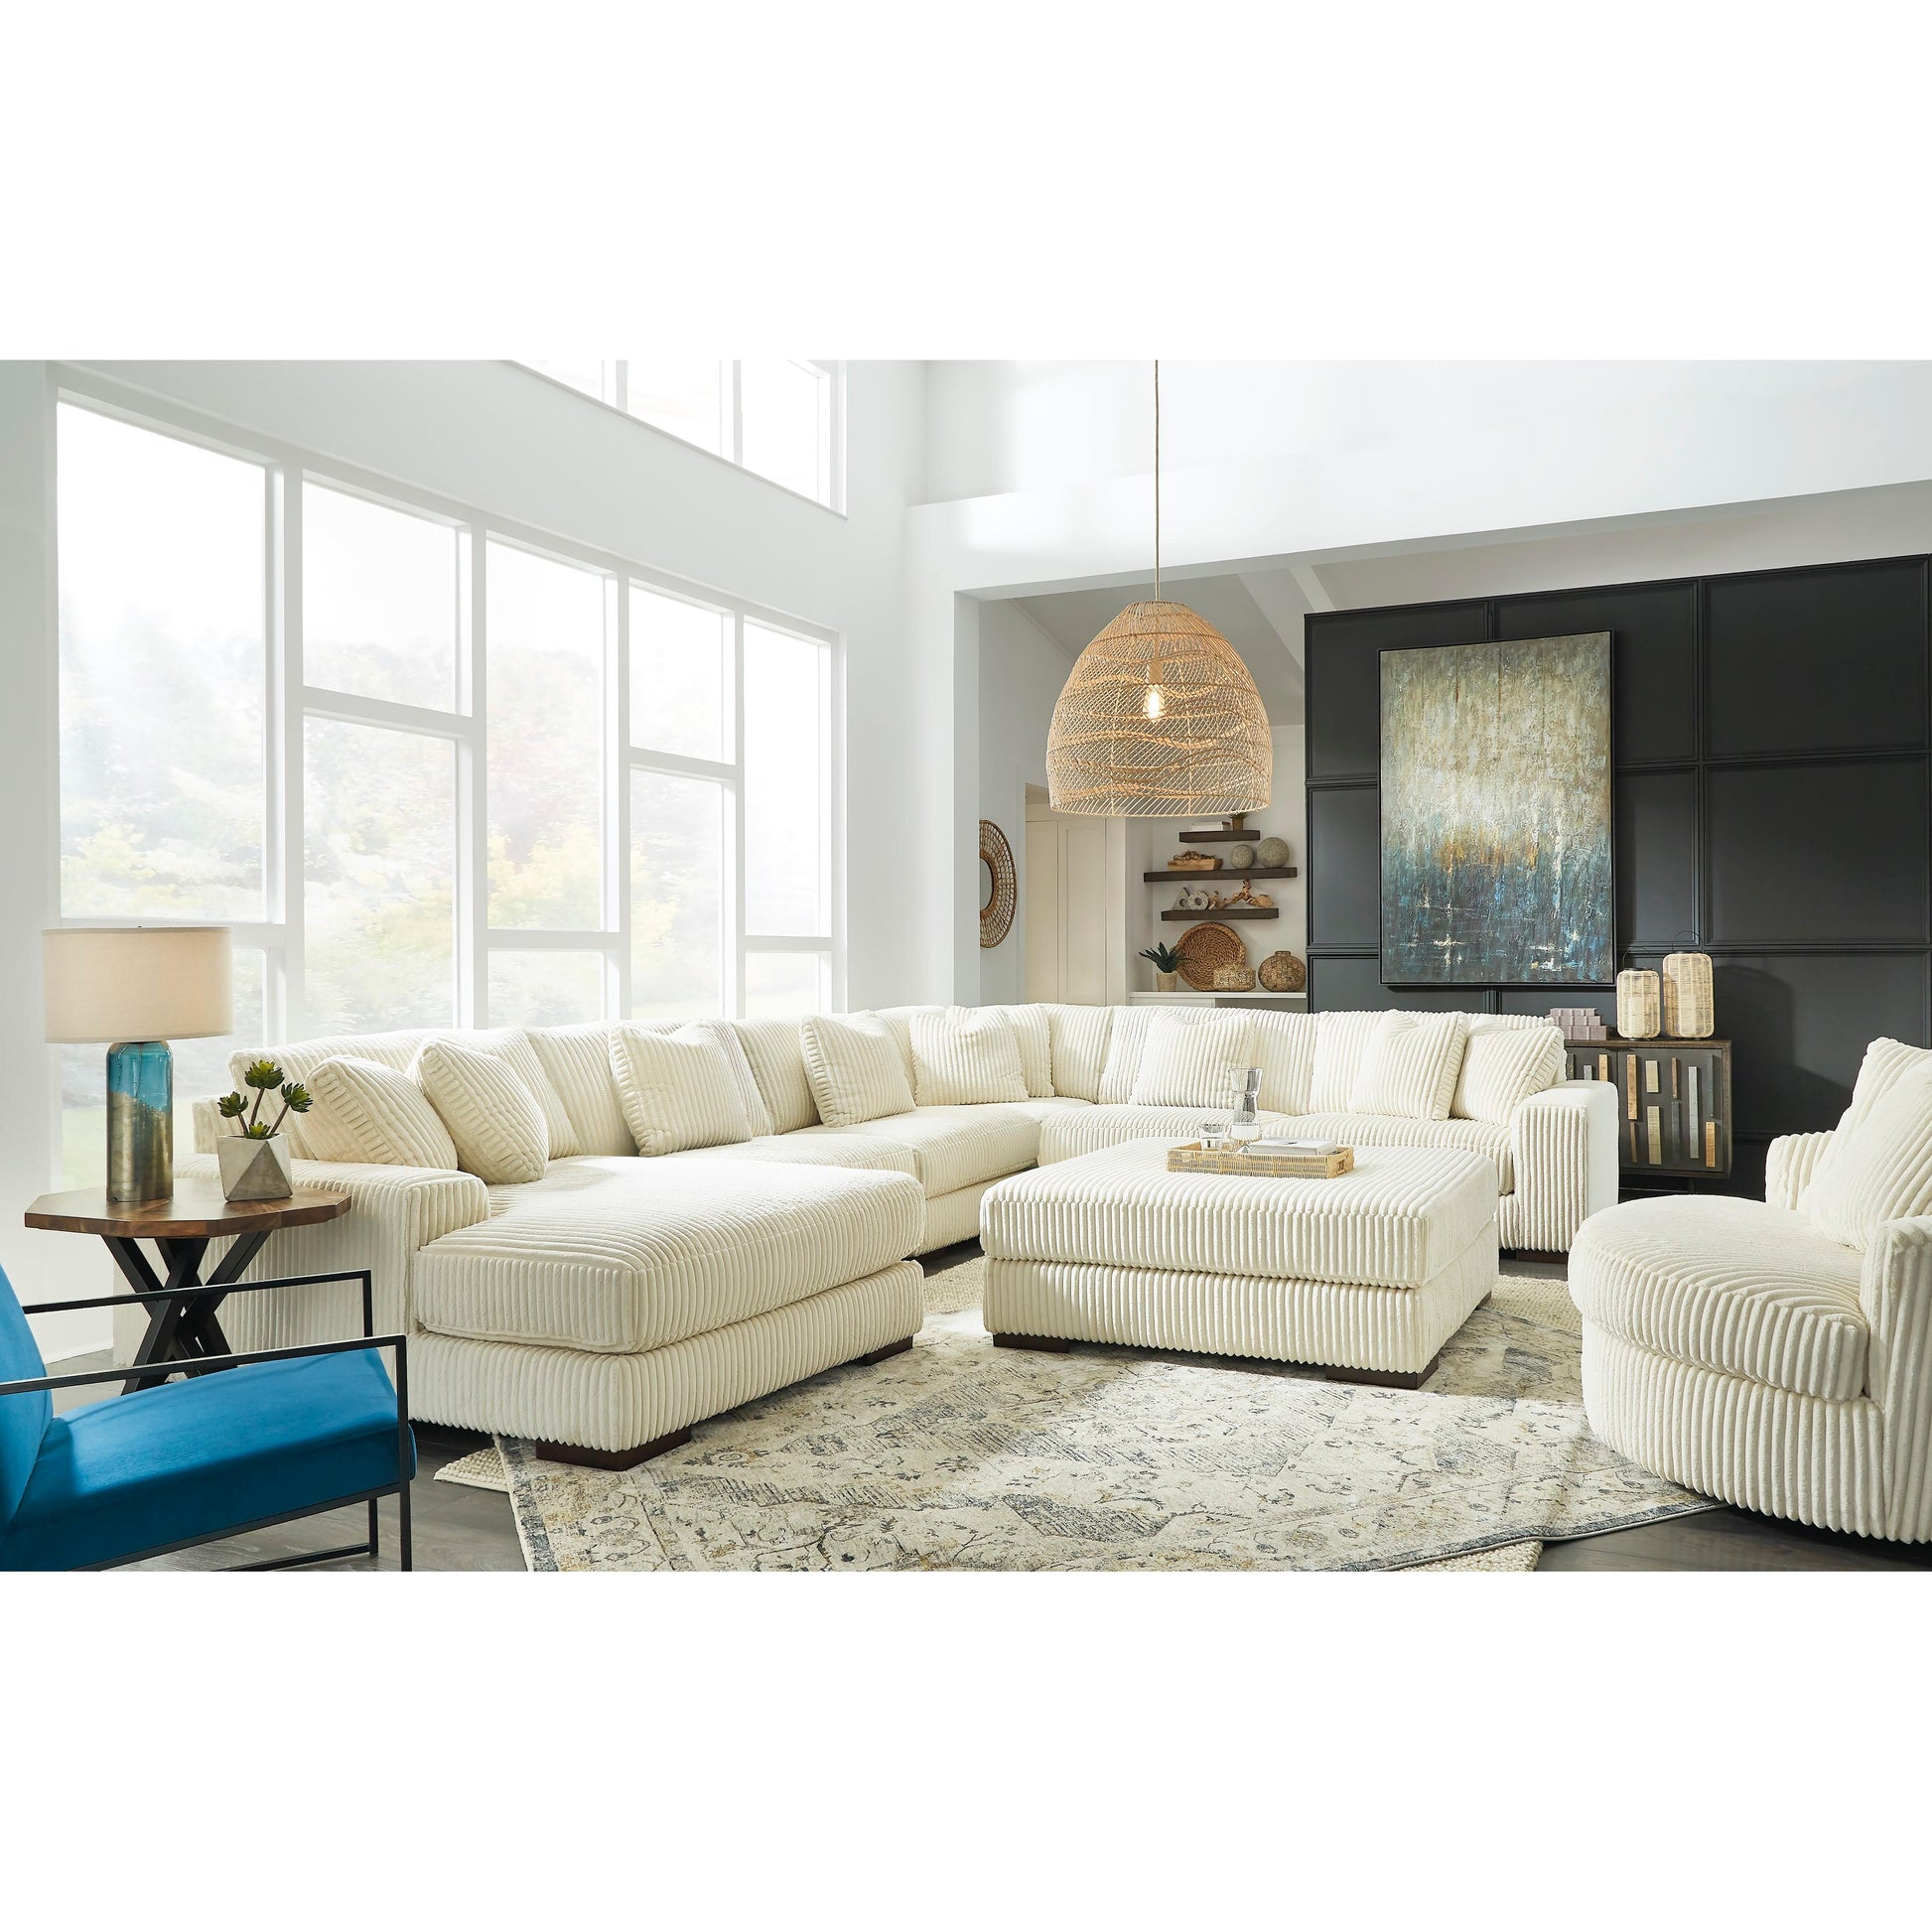 Signature Design by Ashley Lindyn Fabric 6 pc Sectional 2110416/2110446/2110446/2110477/2110446/2110465 IMAGE 4